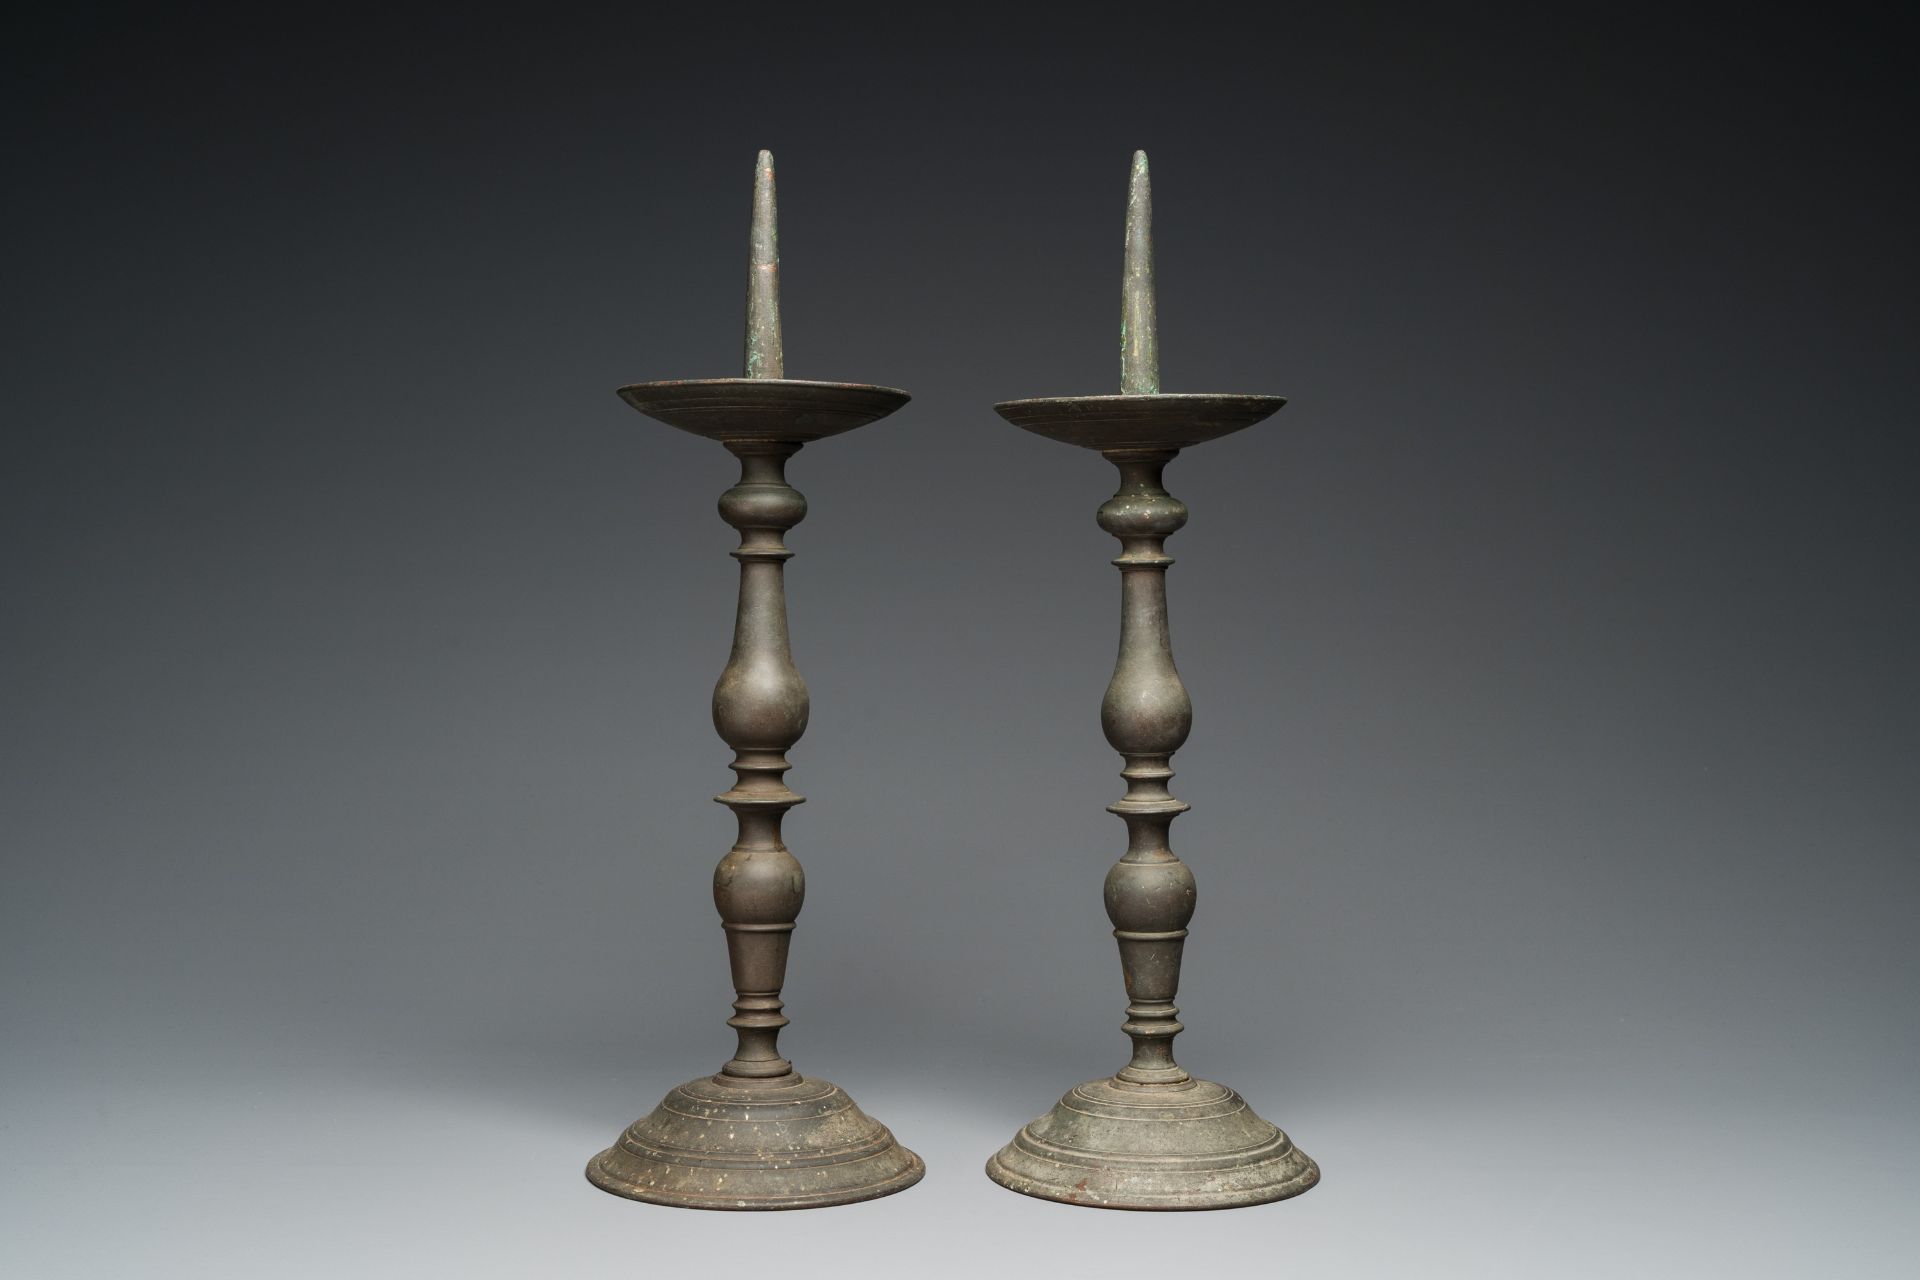 A pair of patinated bronze pricket candlesticks, France, 17th C. - Image 4 of 7